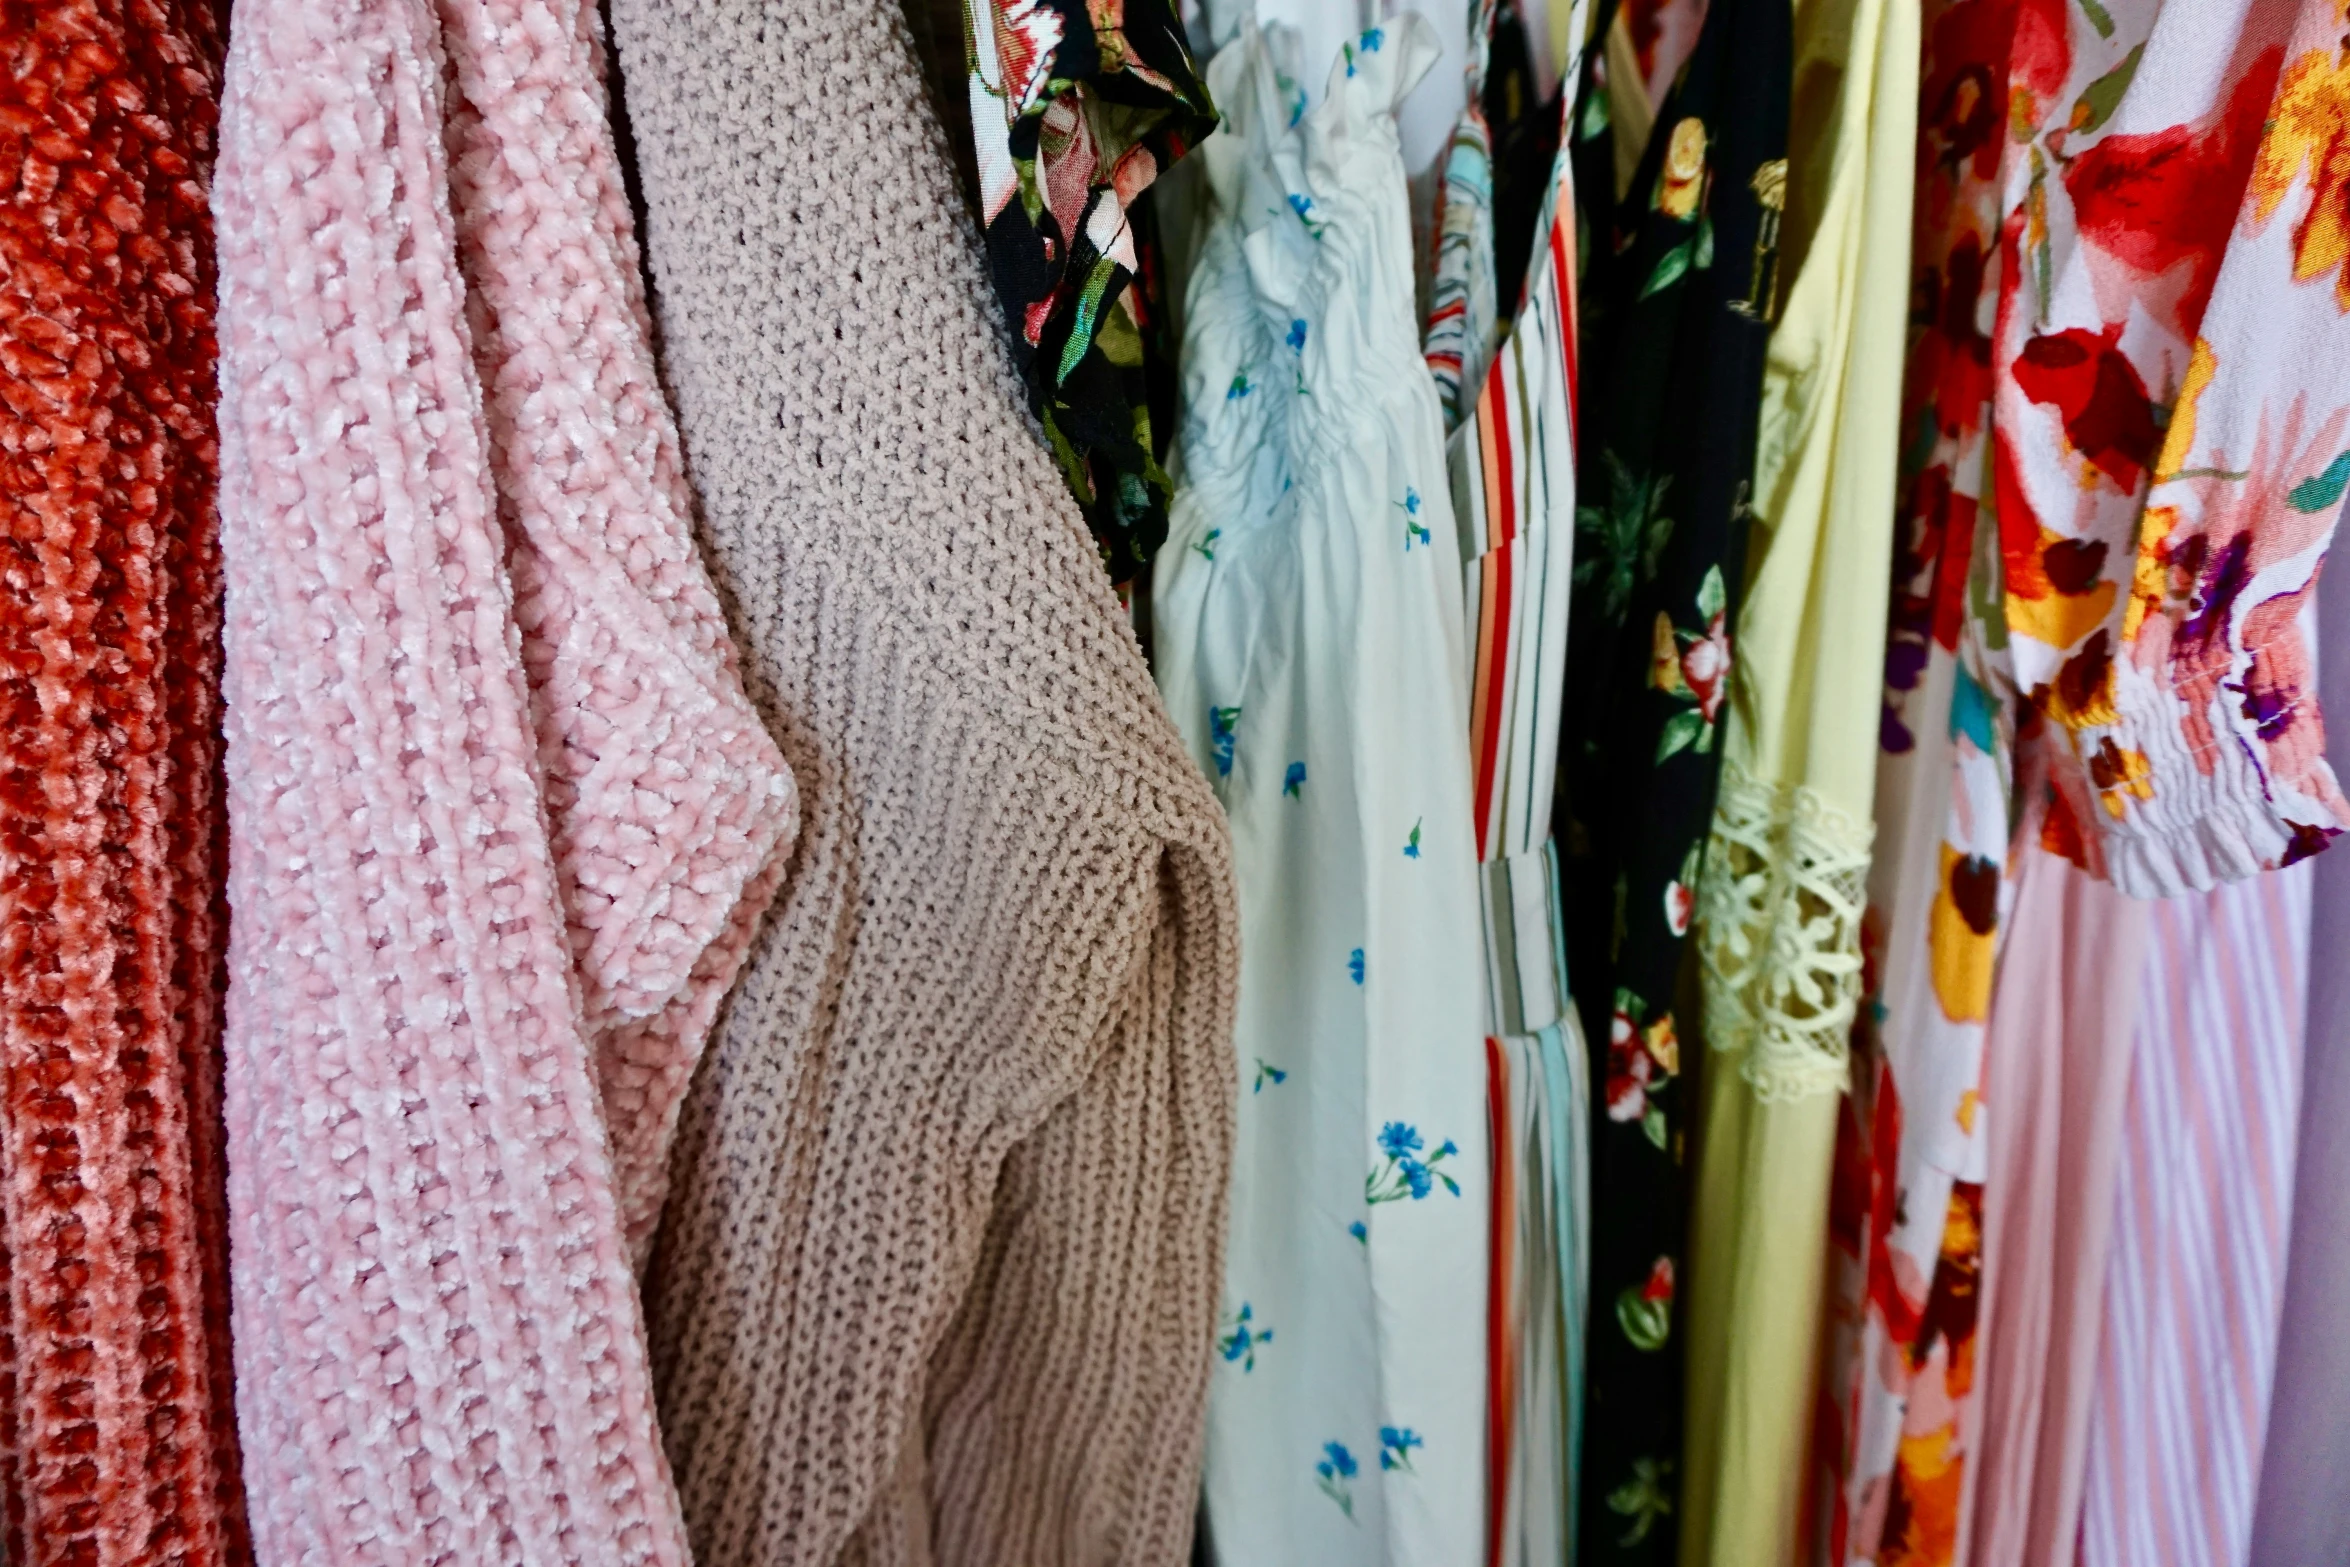 clothing is lined up with floral patterns on them